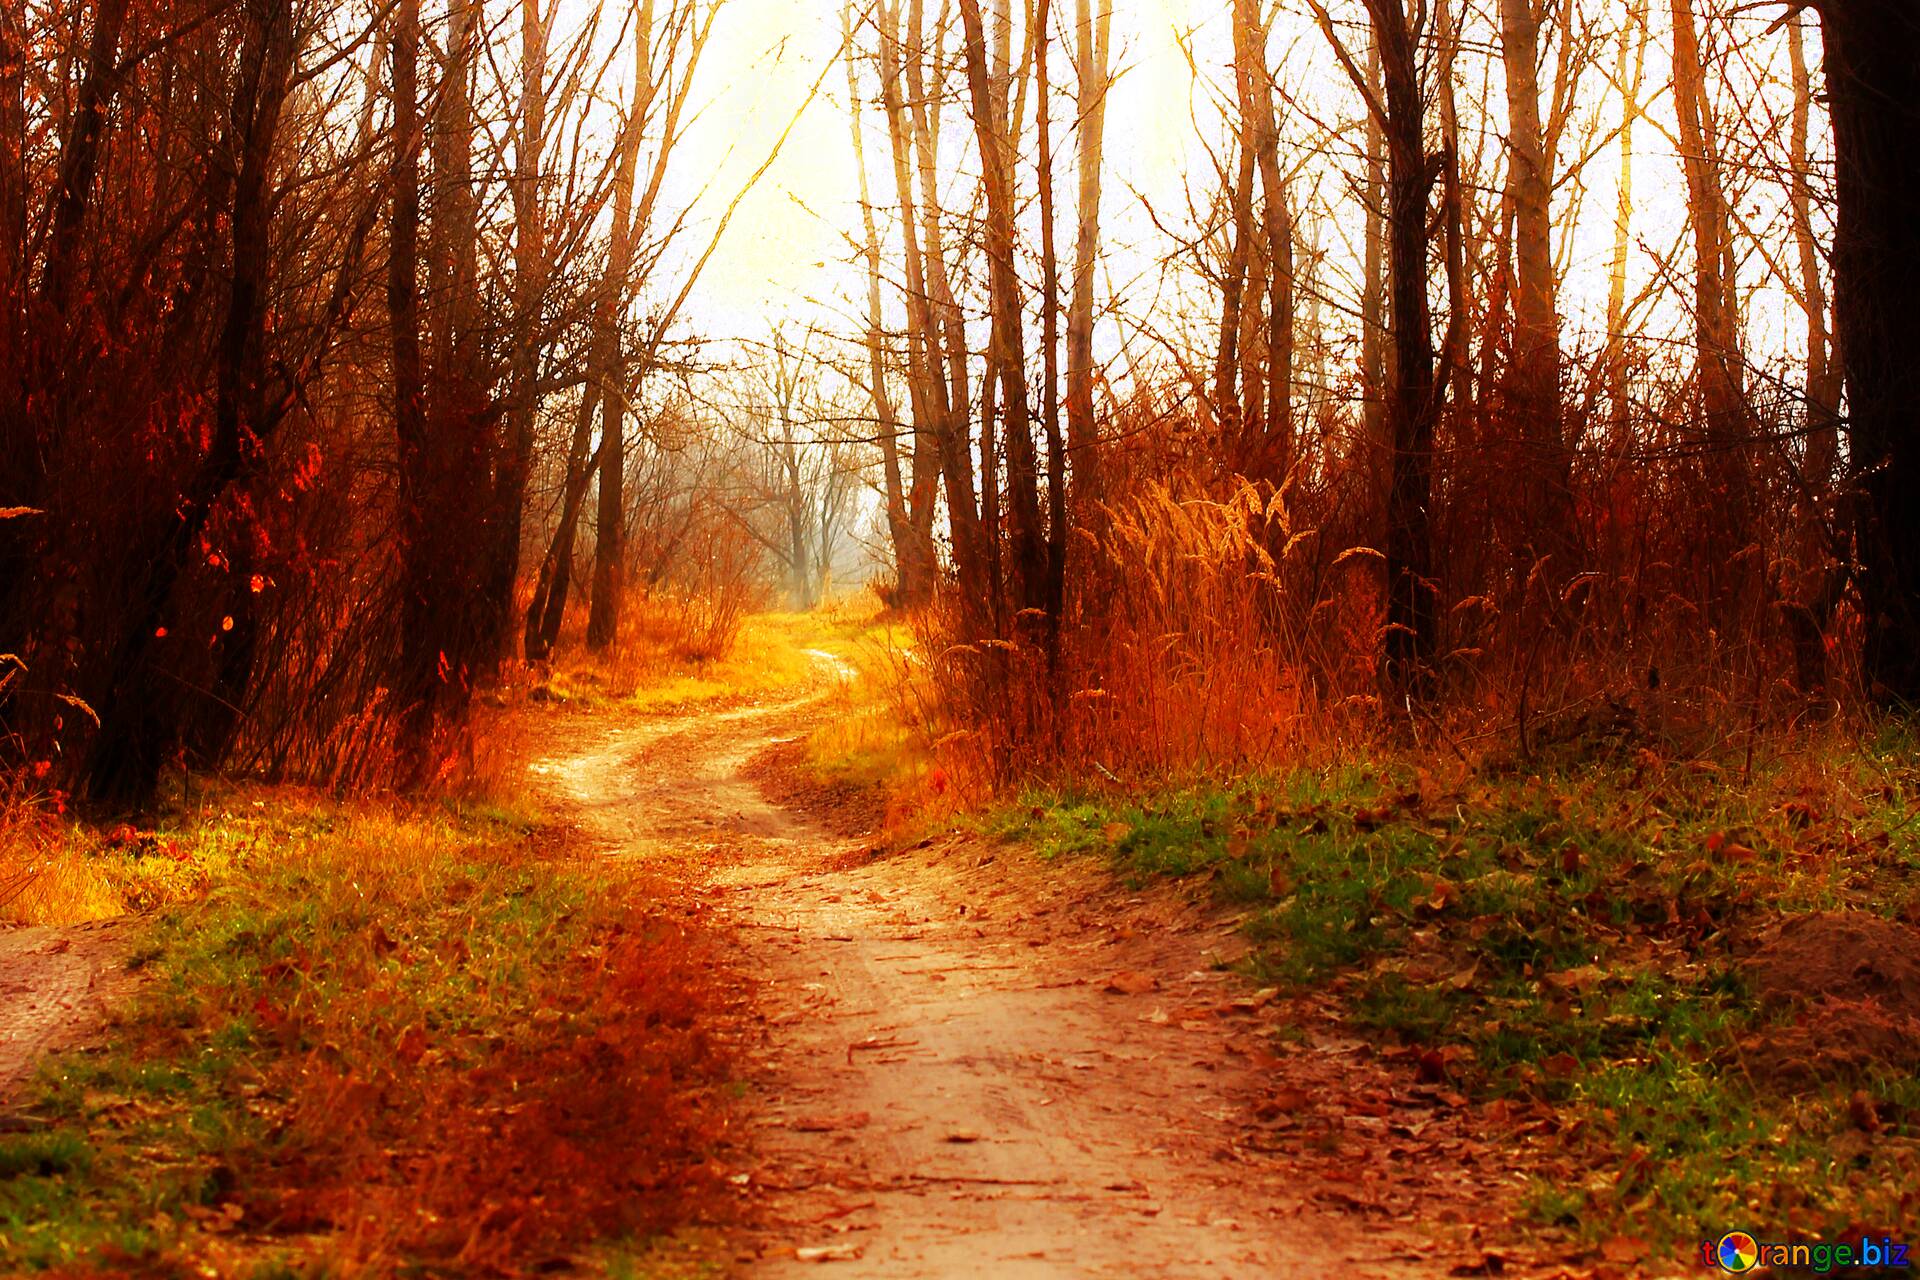 Download Free Picture Soft Blurred Road In Forest In Autumn On CC BY License Free Image Stock TOrange.biz Fx №213281